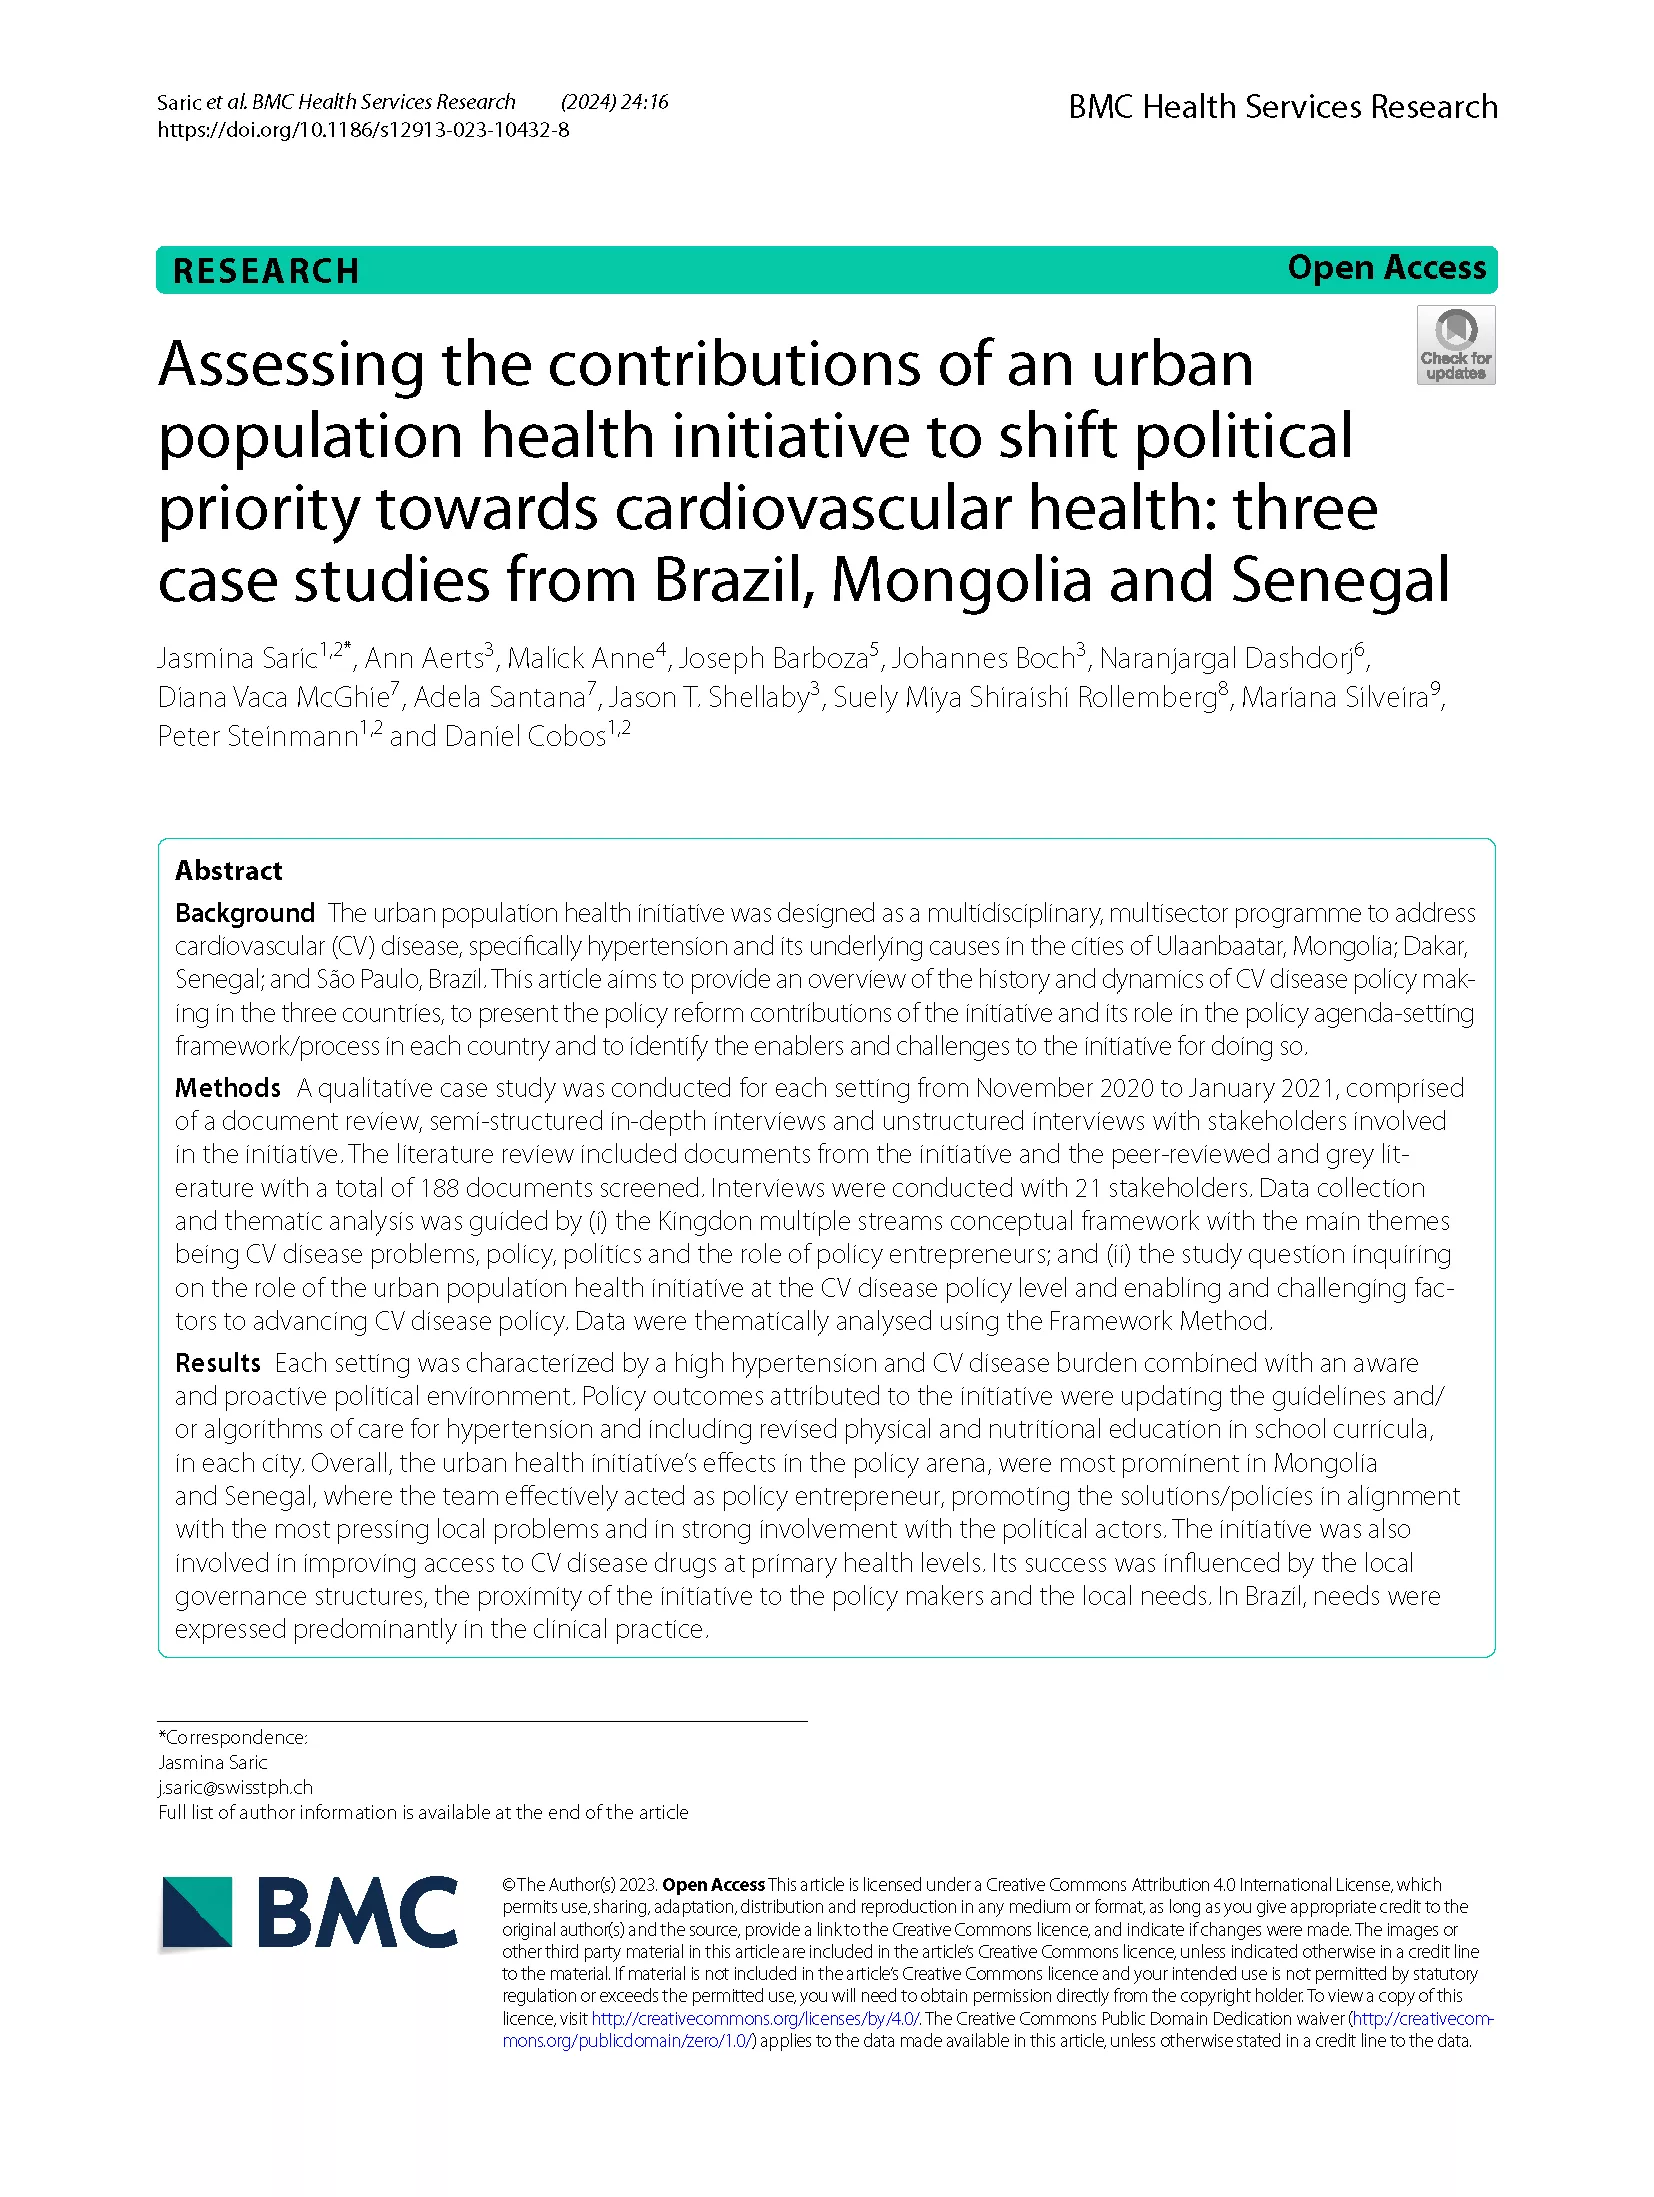 assessing-the-contributions-of -an-urban-population-health-initiative-to-shift-political-priority-towards-cardiovascular-health